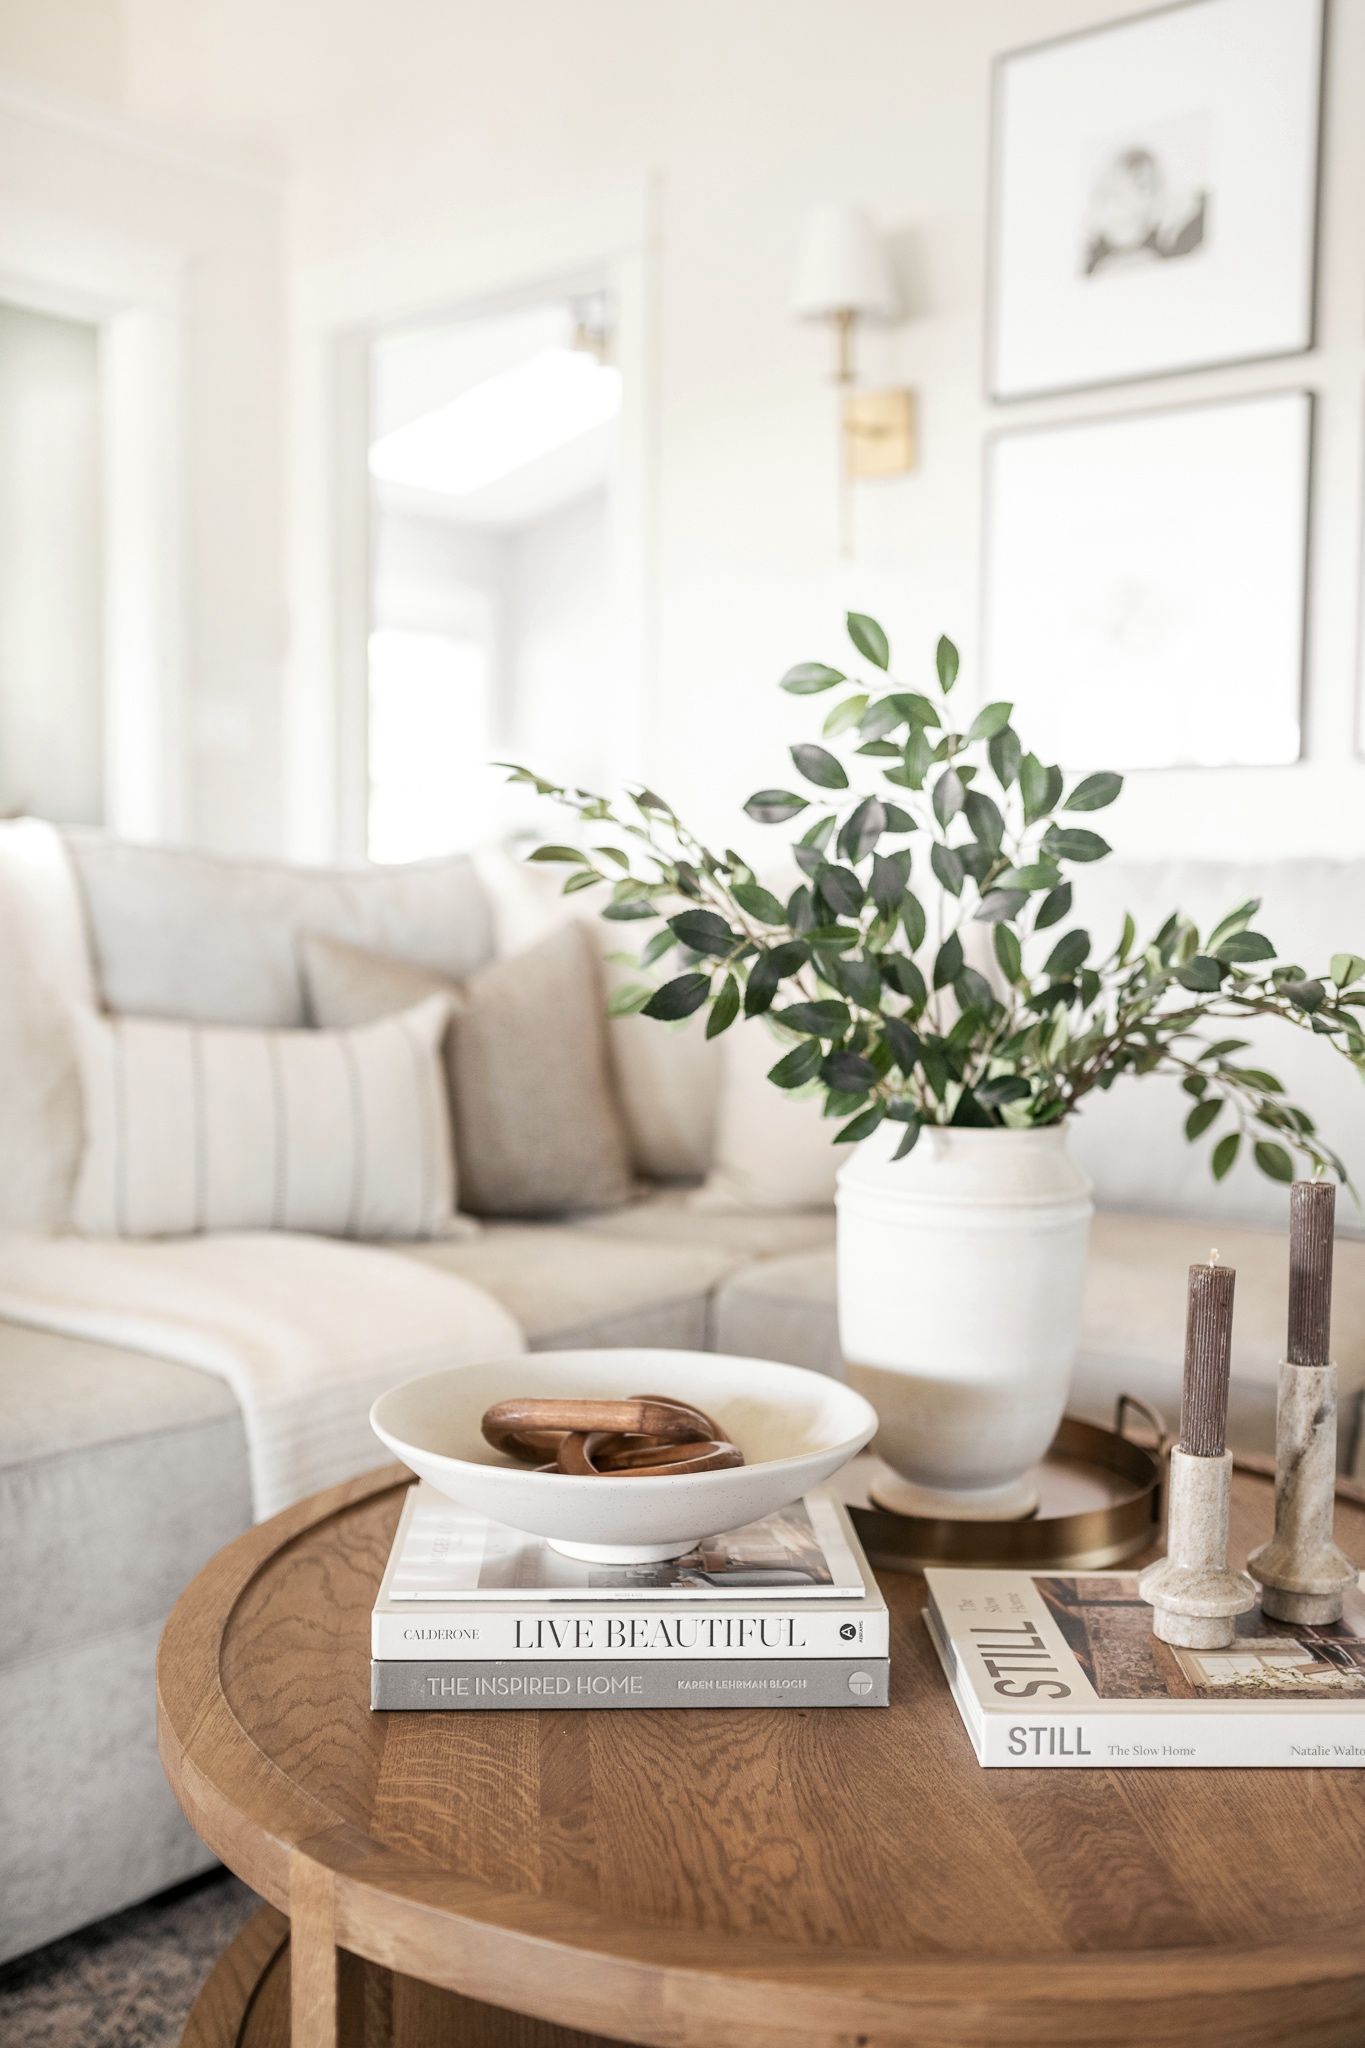 Choosing the Perfect Round Coffee Table
for Your Space